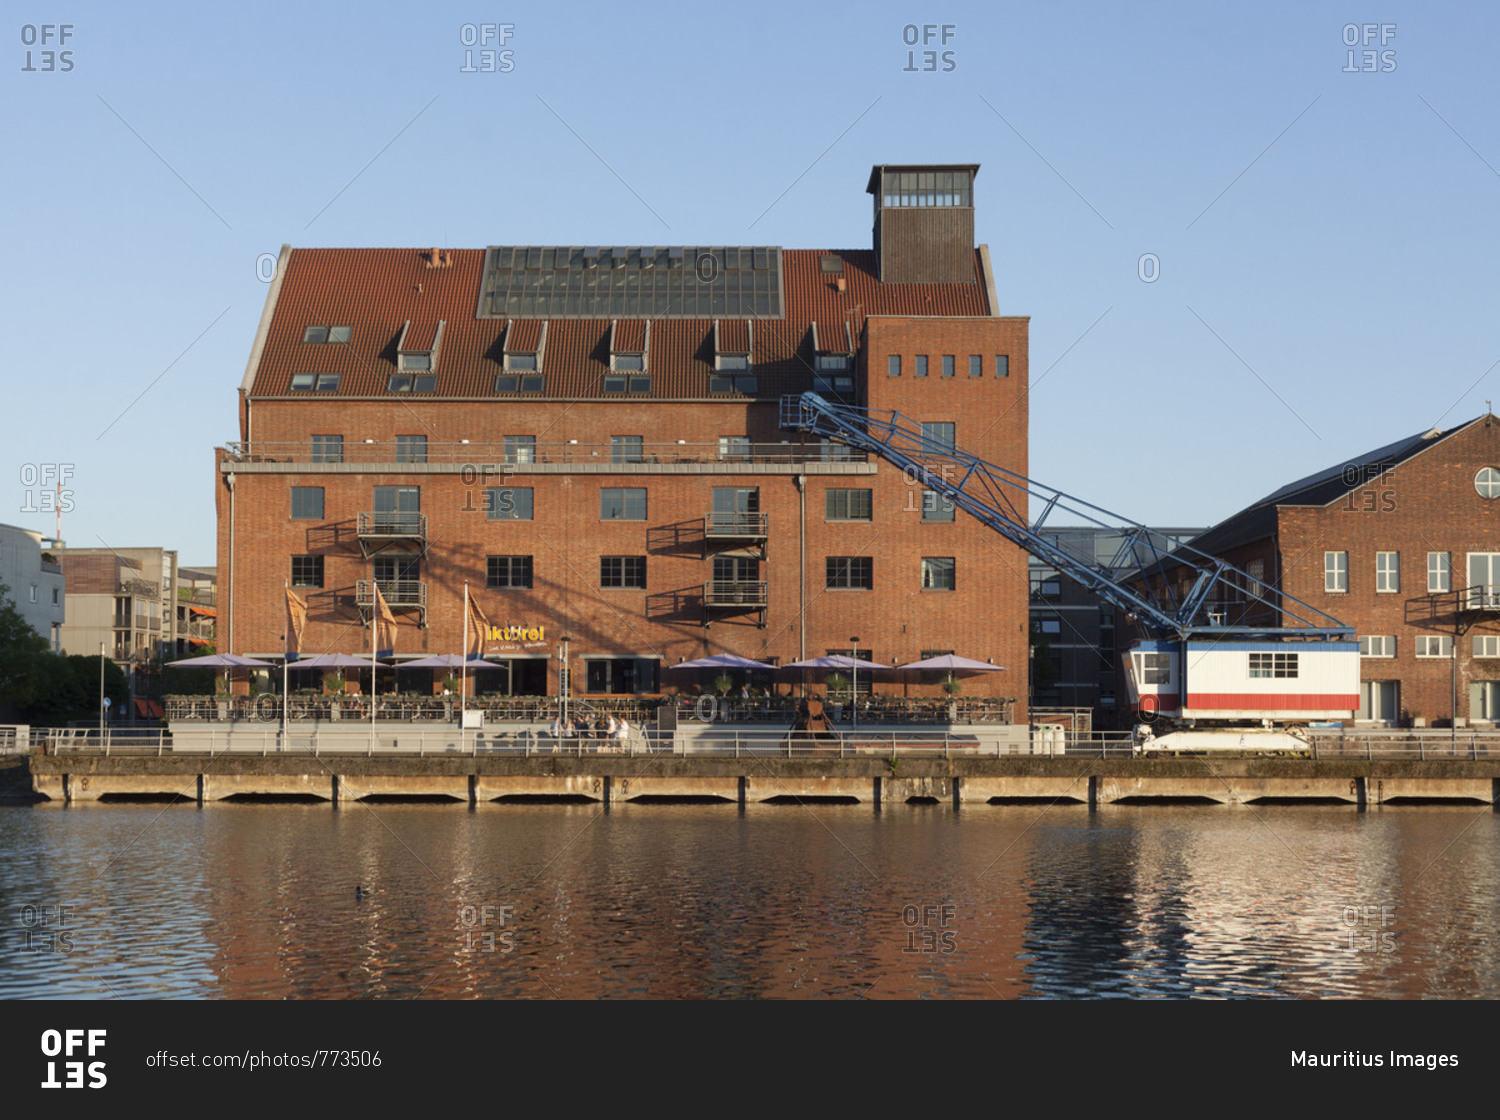 Werhahn mill and the building \'Faktorei 21\', historic industrial architecture at the Innenharbour, Duisburg, Ruhr area, North Rhine-Westphalia, Germany, Europe